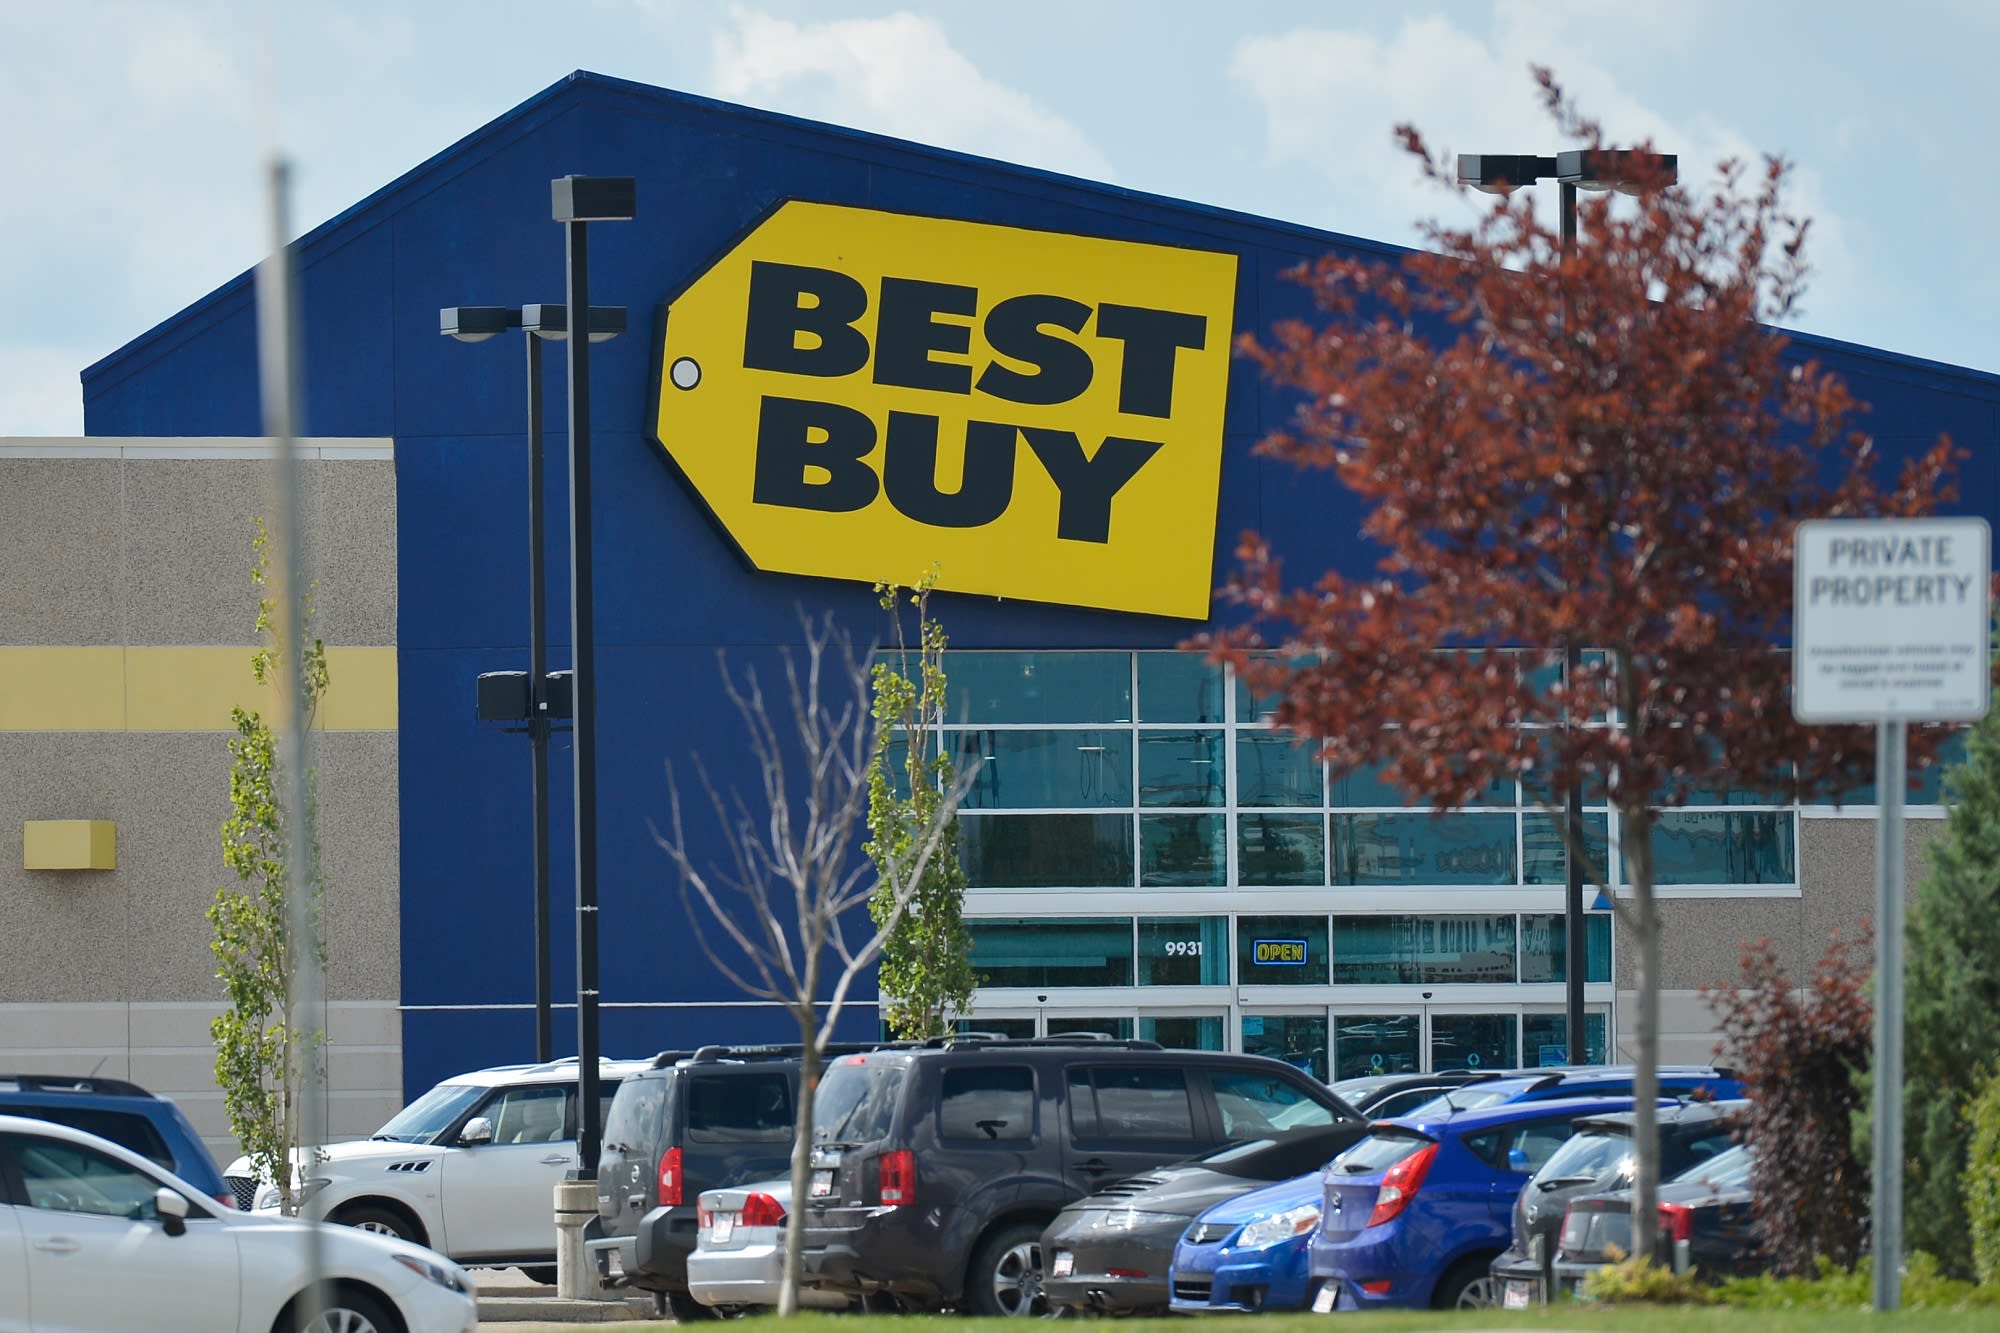 Best Buy is days away from tariffs on its core products but is prepared, CEO says